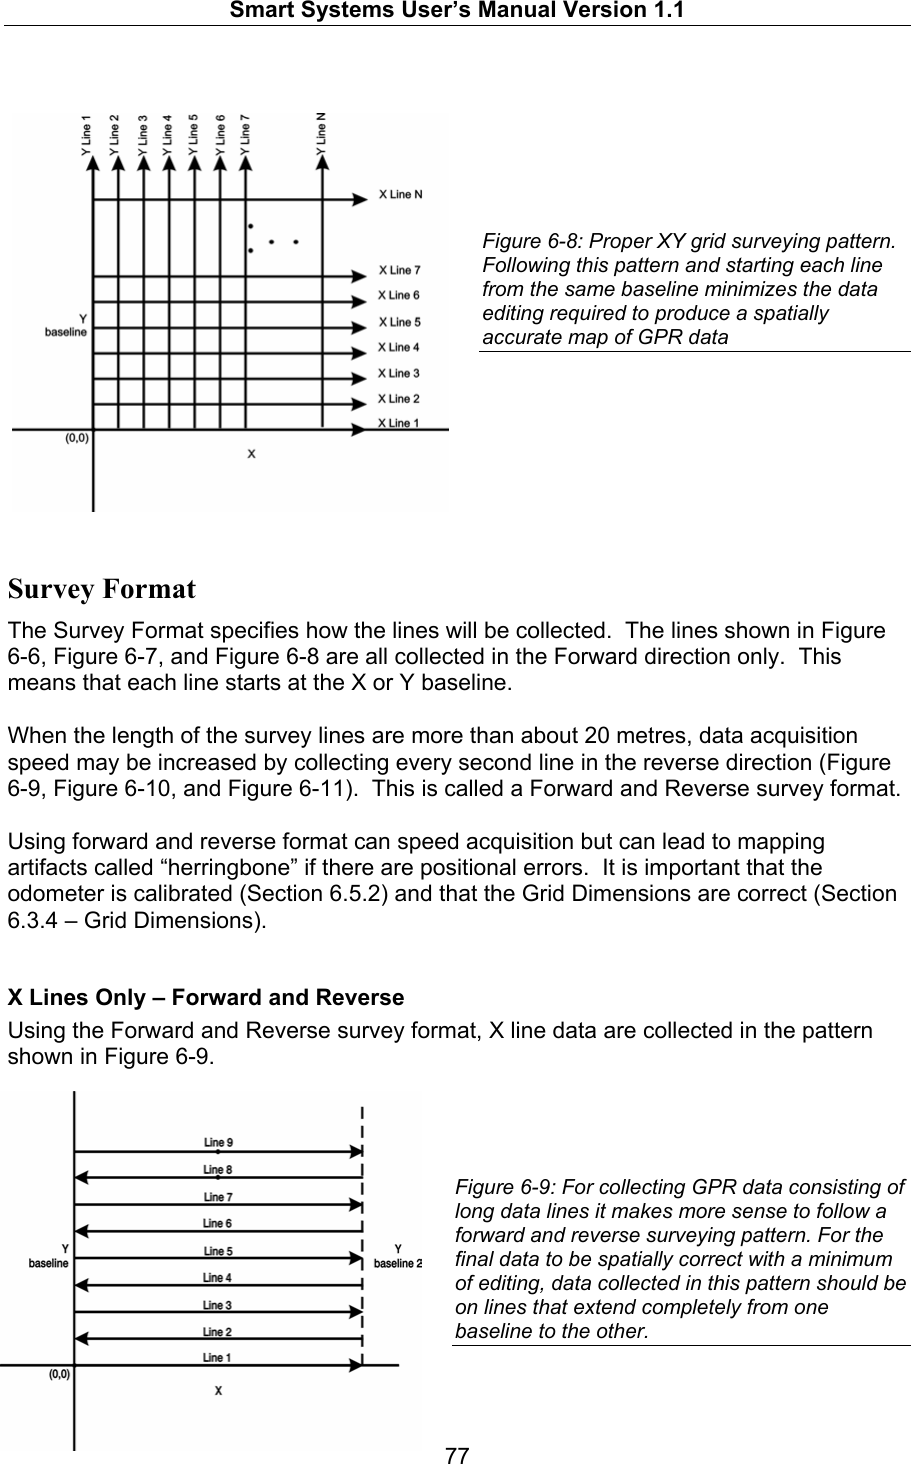   Smart Systems User’s Manual Version 1.1  77        Figure 6-8: Proper XY grid surveying pattern.  Following this pattern and starting each line from the same baseline minimizes the data editing required to produce a spatially accurate map of GPR data         Survey Format The Survey Format specifies how the lines will be collected.  The lines shown in Figure 6-6, Figure 6-7, and Figure 6-8 are all collected in the Forward direction only.  This means that each line starts at the X or Y baseline.   When the length of the survey lines are more than about 20 metres, data acquisition speed may be increased by collecting every second line in the reverse direction (Figure 6-9, Figure 6-10, and Figure 6-11).  This is called a Forward and Reverse survey format.  Using forward and reverse format can speed acquisition but can lead to mapping artifacts called “herringbone” if there are positional errors.  It is important that the odometer is calibrated (Section 6.5.2) and that the Grid Dimensions are correct (Section 6.3.4 – Grid Dimensions).  X Lines Only – Forward and Reverse Using the Forward and Reverse survey format, X line data are collected in the pattern shown in Figure 6-9.     Figure 6-9: For collecting GPR data consisting of long data lines it makes more sense to follow a forward and reverse surveying pattern. For the final data to be spatially correct with a minimum of editing, data collected in this pattern should be on lines that extend completely from one baseline to the other.   